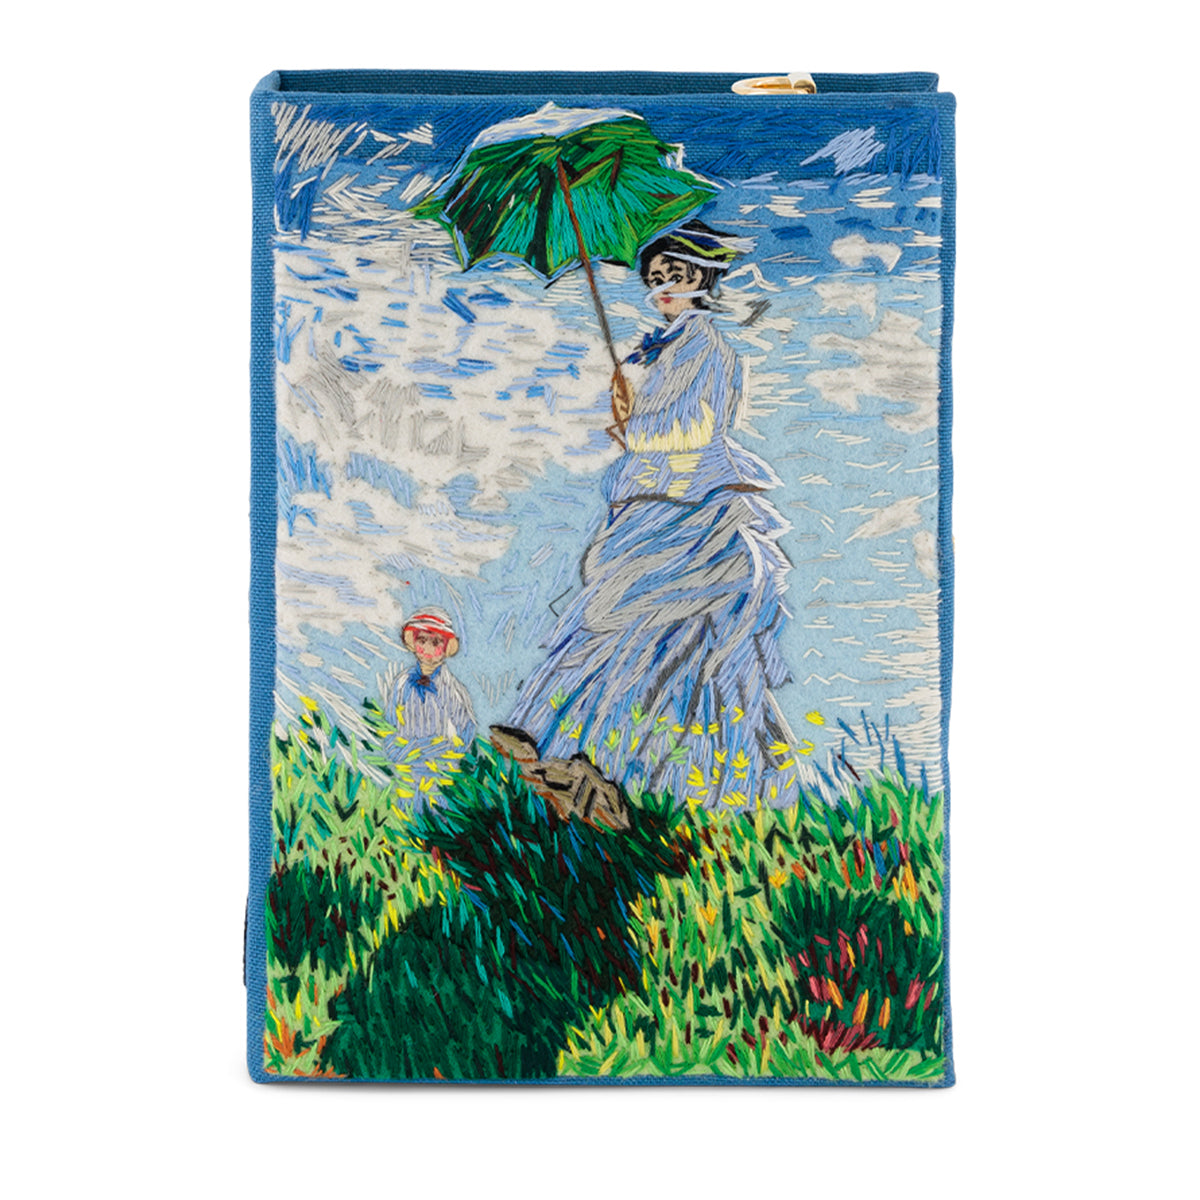 Monet "Femme A L'ombrelle" Book Clutch with Strap - Olympia Le-Tan